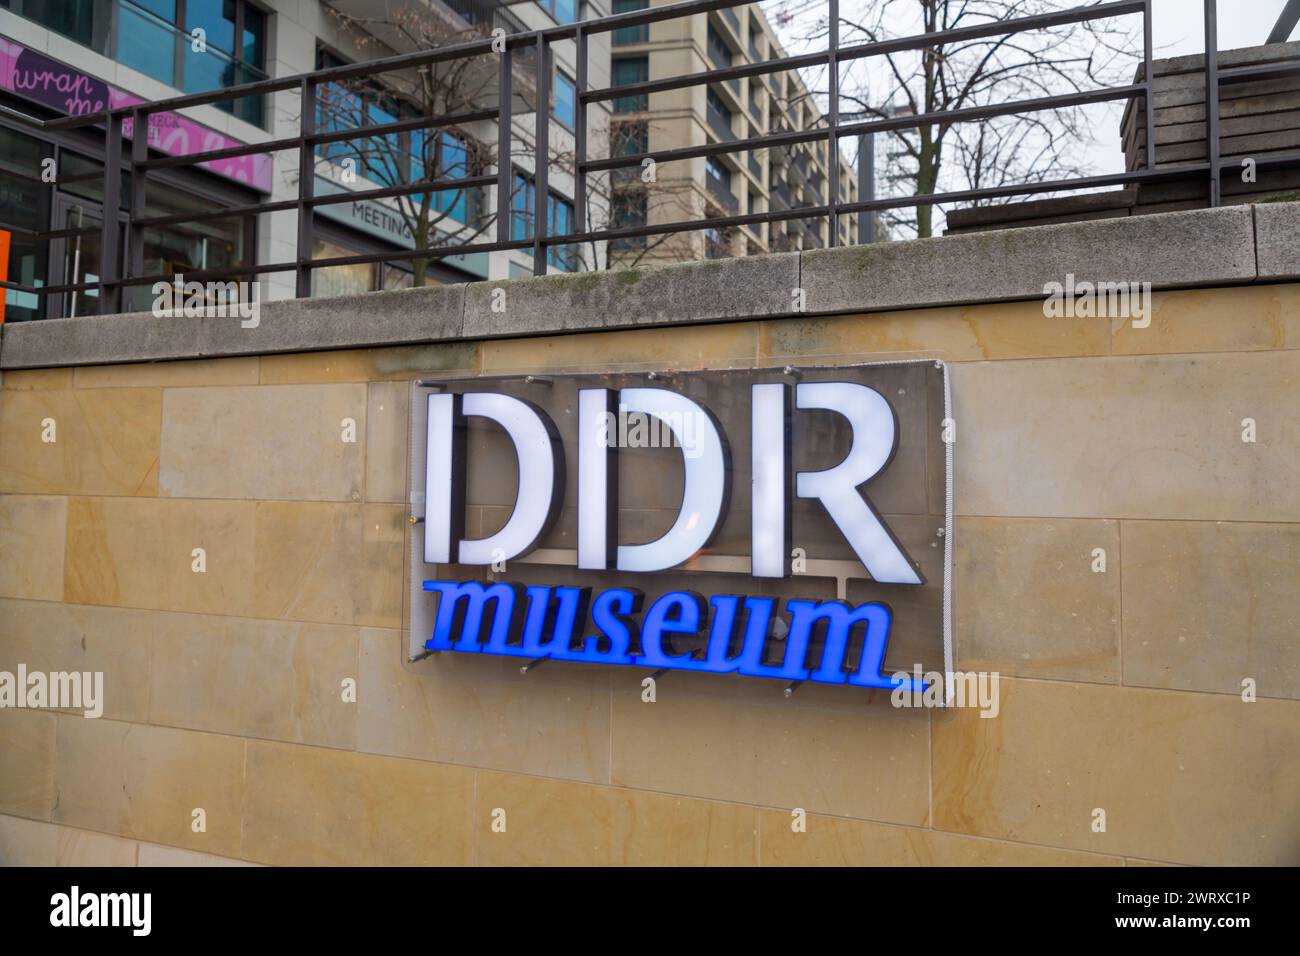 Berlin, Germany - 16 DEC 2021: The DDR Museum located in the former governmental district of East Germany, right on the river Spree, opposite the Berl Stock Photo